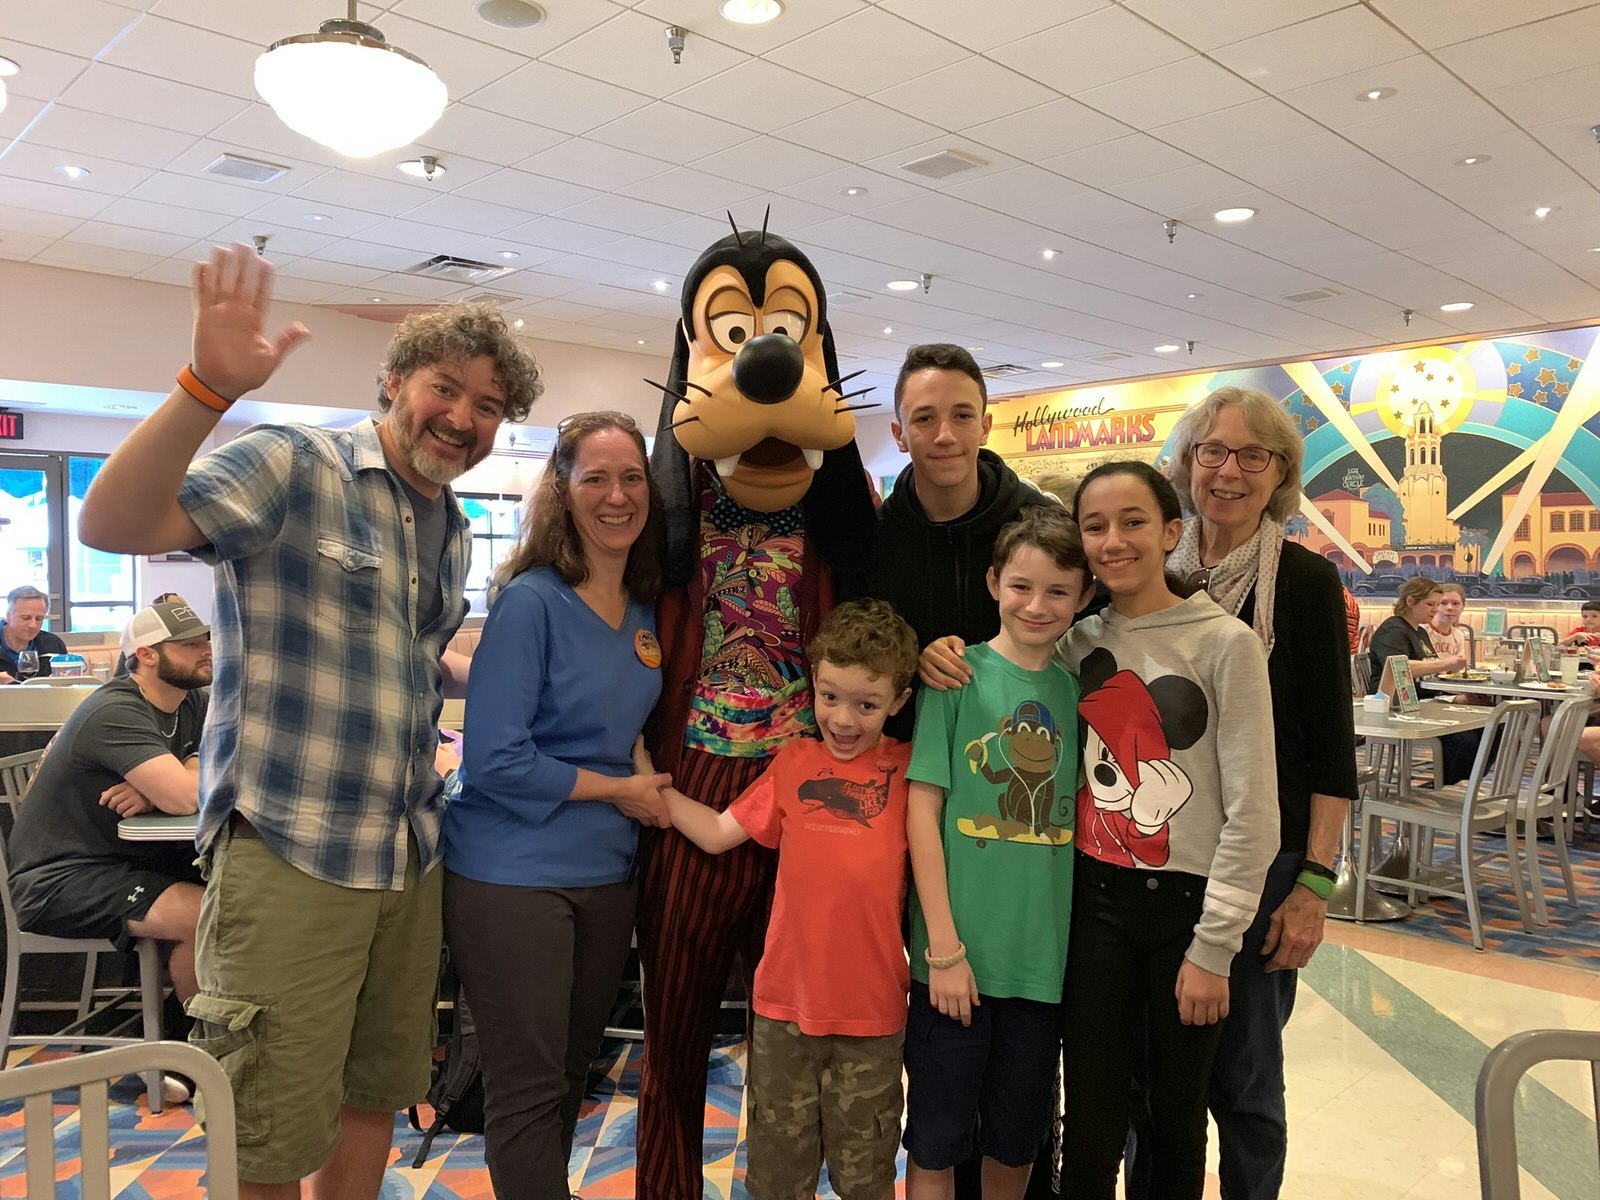 A family smile and wave at the camera gathered around someone in a Goofy costume at Disney World